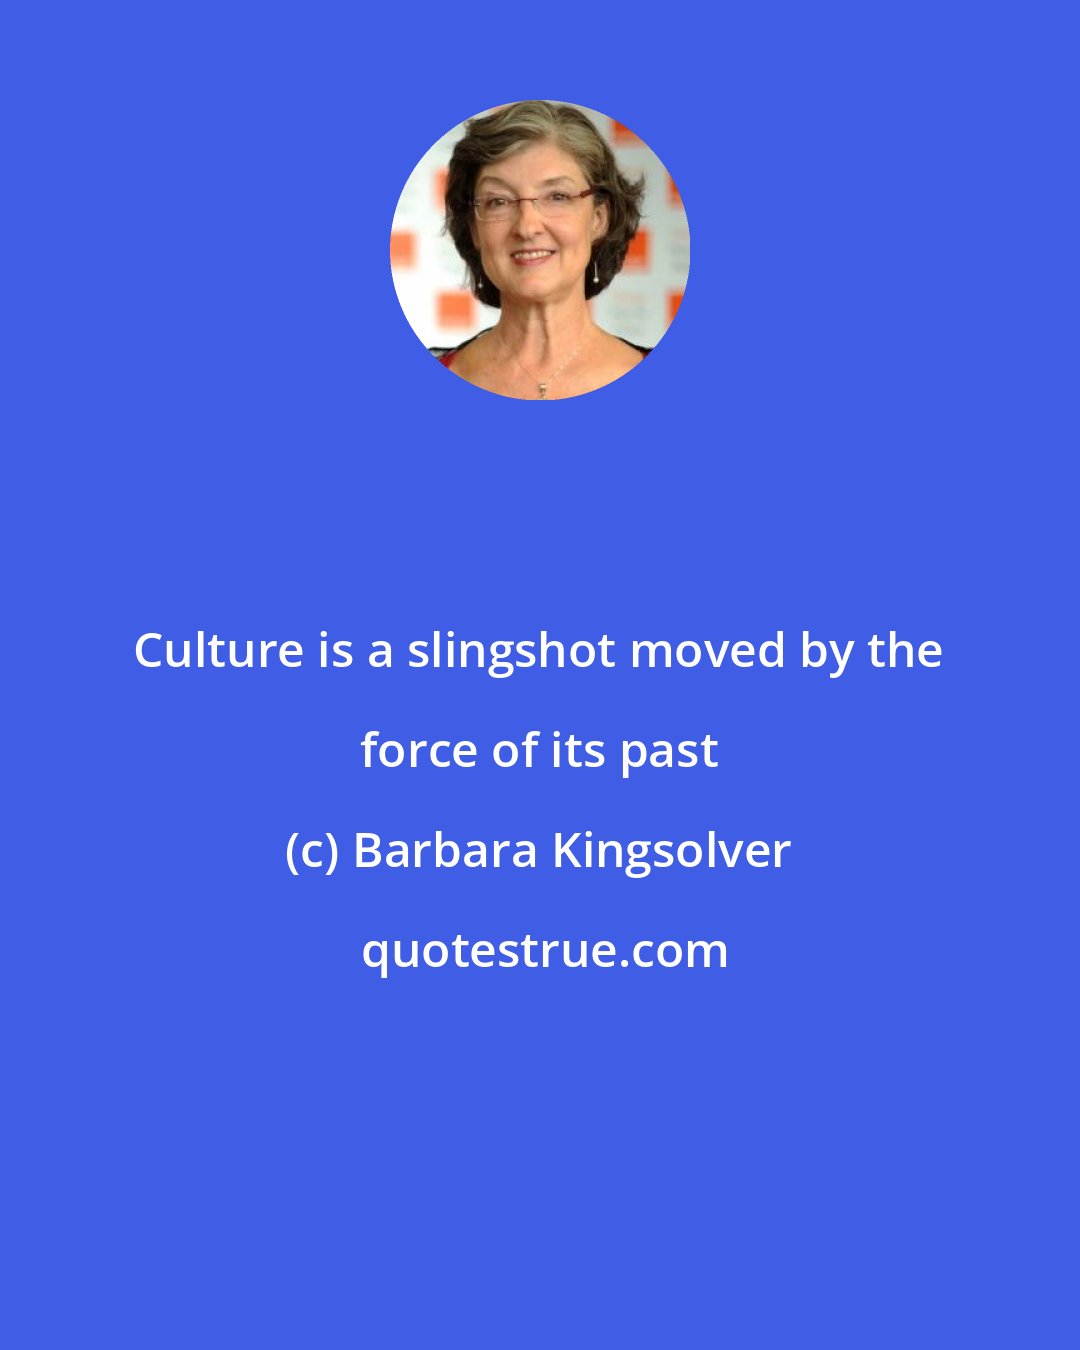 Barbara Kingsolver: Culture is a slingshot moved by the force of its past